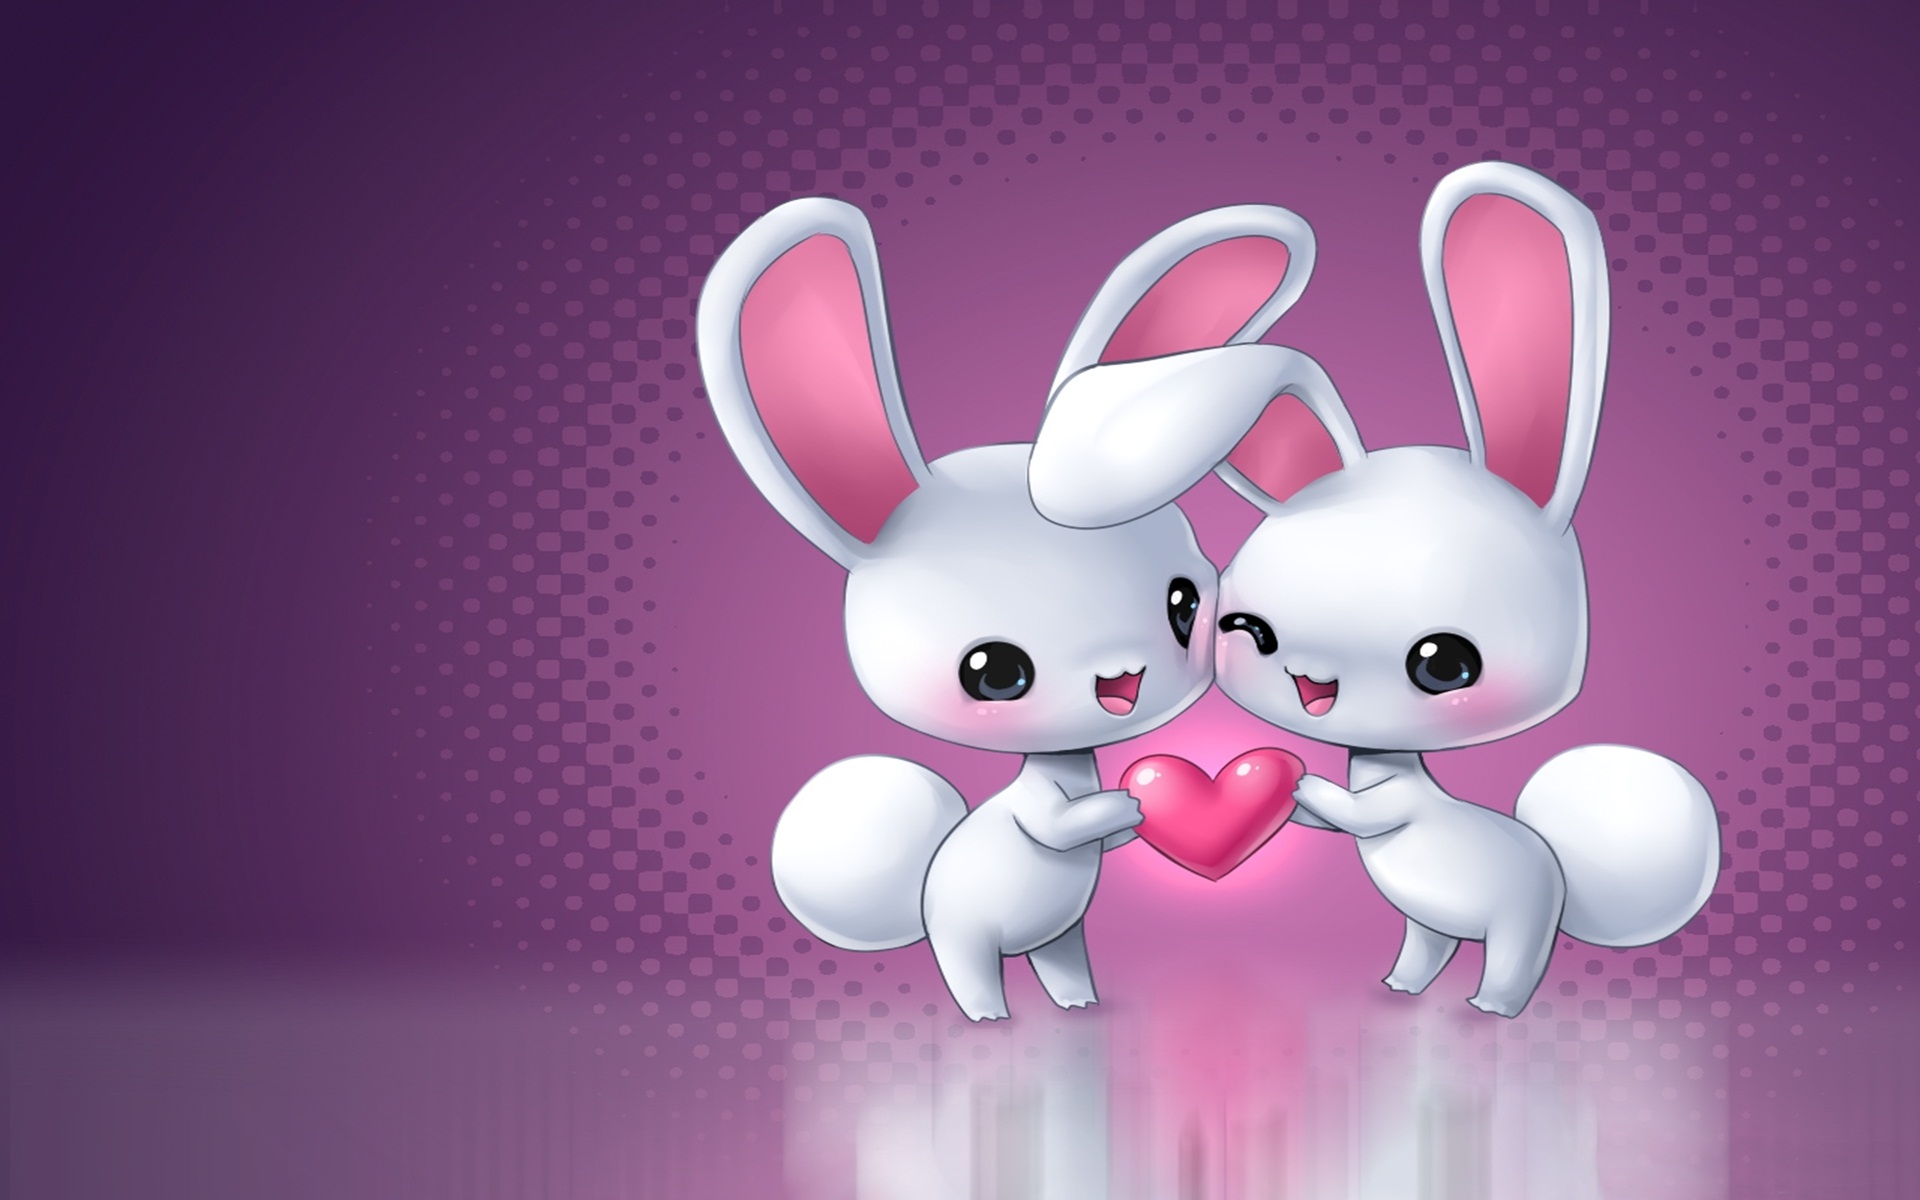 Animated Cute Love Wallpapers For Mobile Phones - Cliparts.co